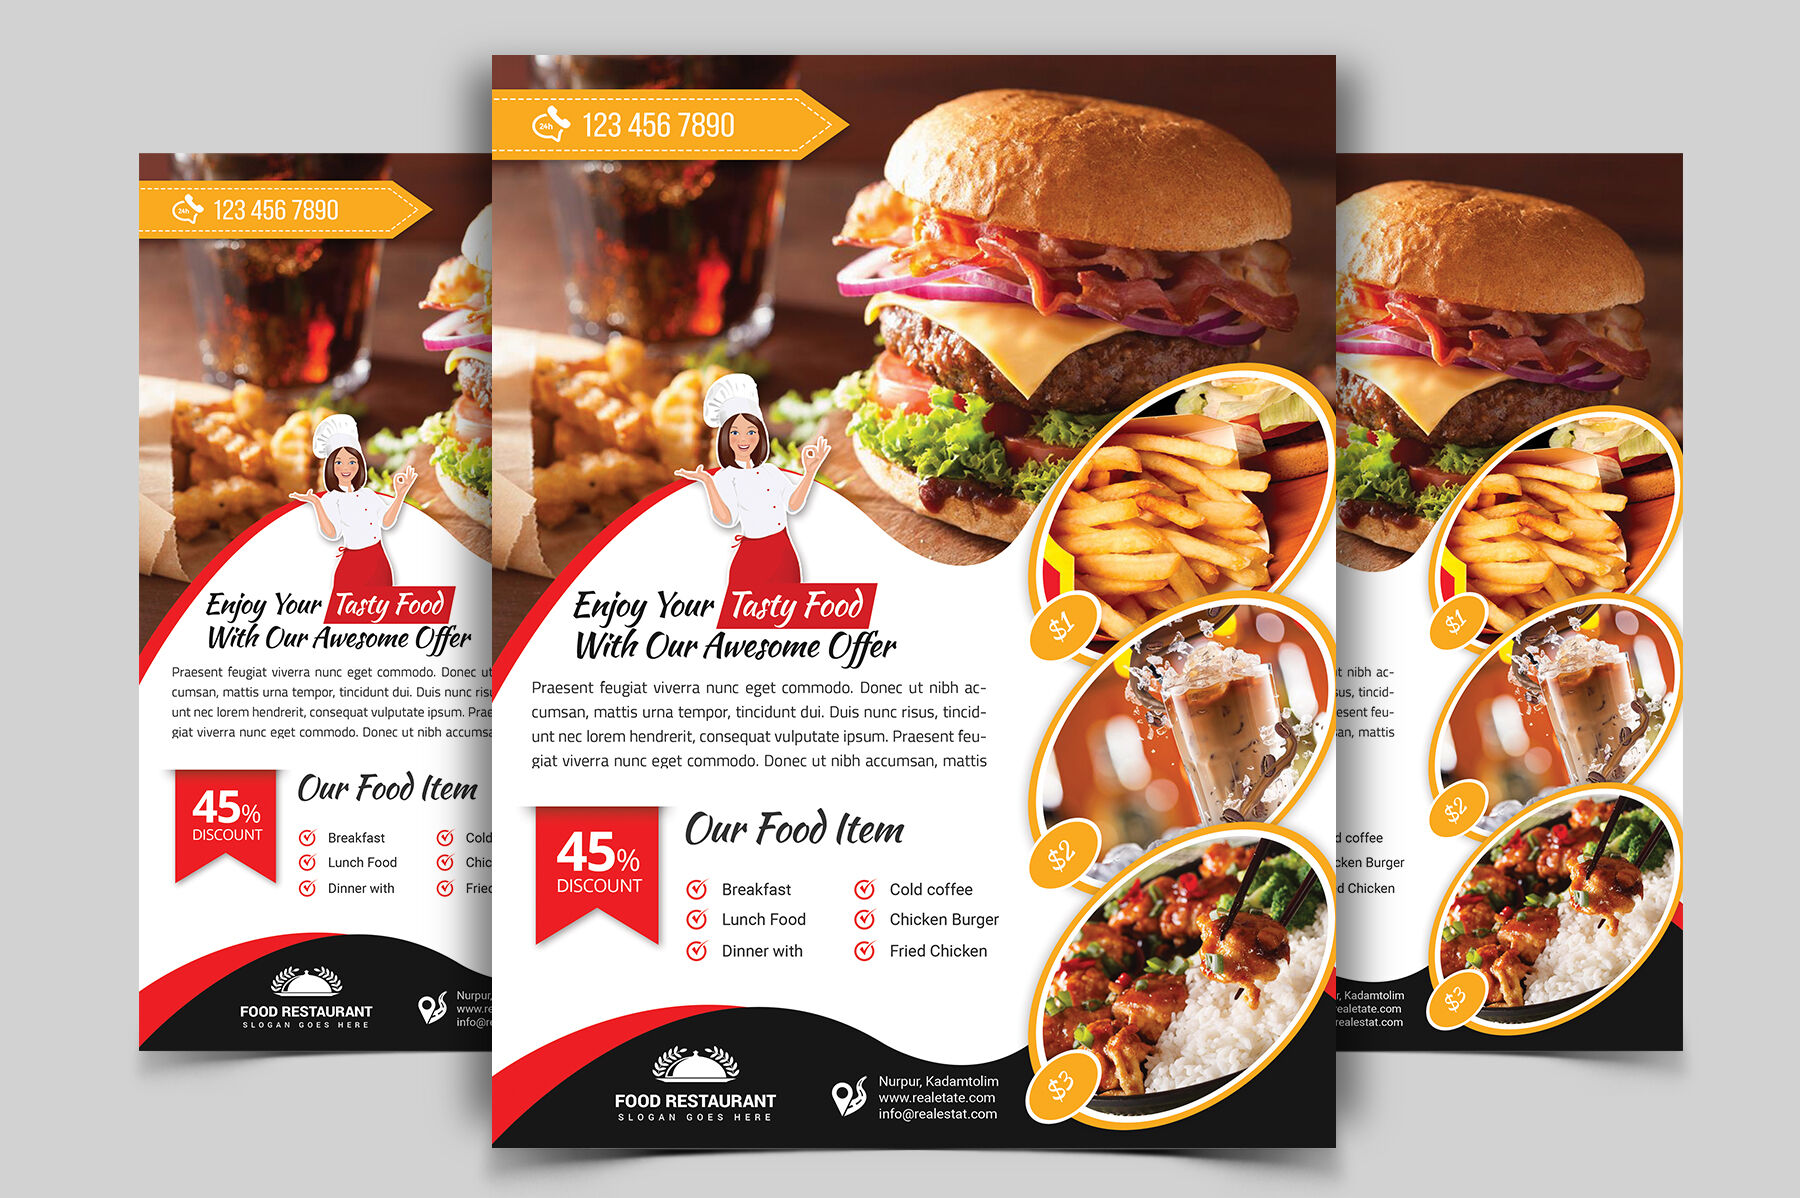 Download Free Restaurant Flyer Mockup Psd Free Download - Free PSD Mockups Smart Object and Templates to ...